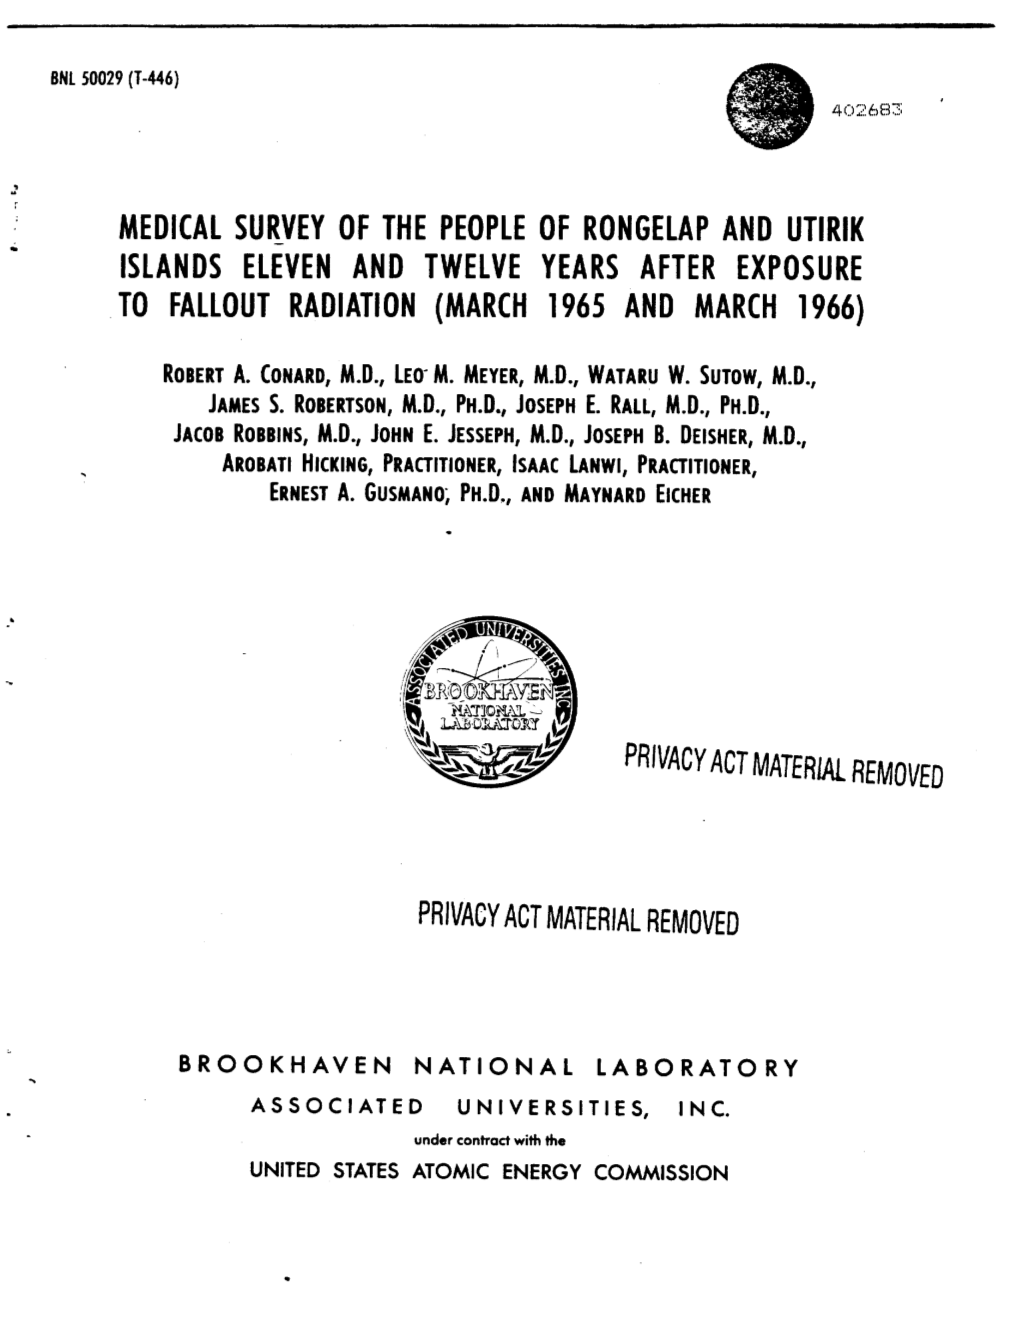 Medical Survey of the People of Rongelap and Utirik Islands Eleven and Twelve Years After Exposure to Fallout Radiation March 65